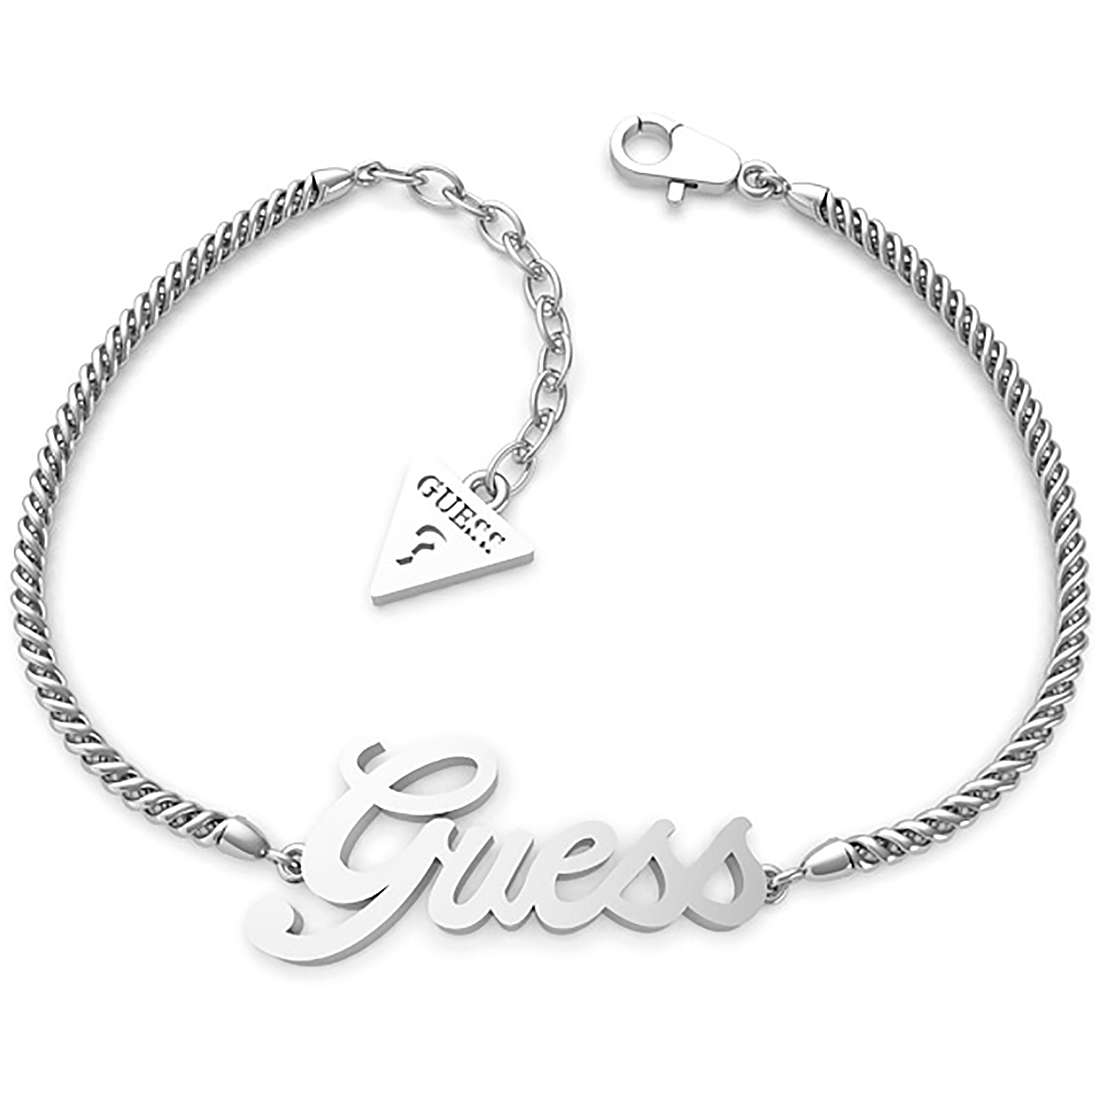 Guess Jewellery Guess Guessy Silver Heart Bracelet - Jewellery from Faith  Jewellers UK